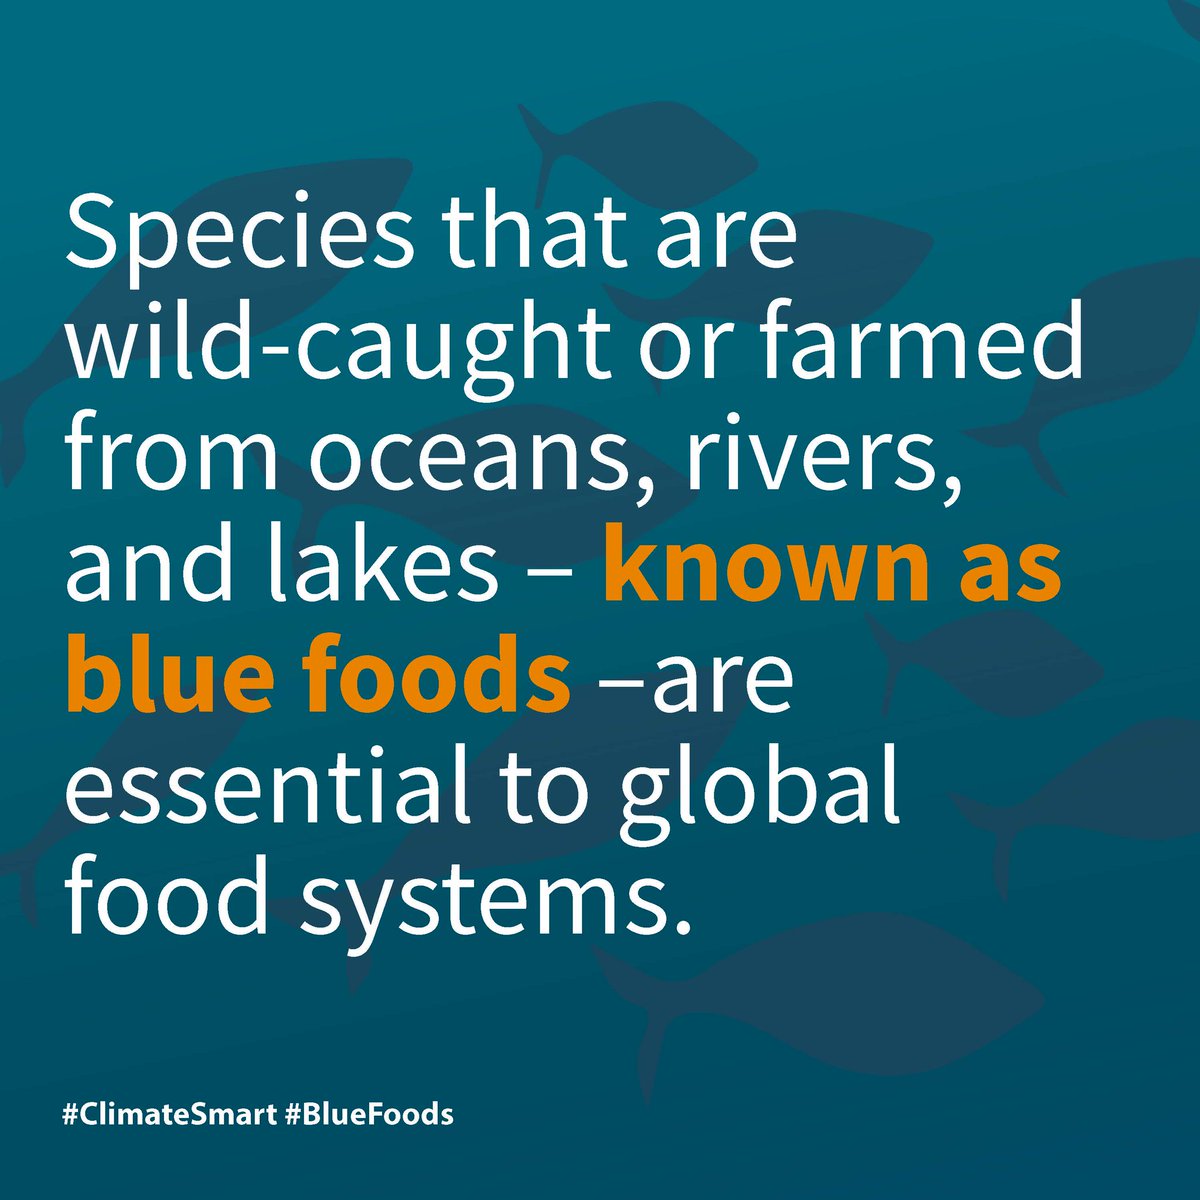 #BlueFoods are essential components of global #FoodSystems. What are these foods? ➡️ Animals and plants from oceans, rivers, & lakes - critical to nutrition, health, livelihoods, economies, & cultures worldwide.

Read more about blue foods: bit.ly/ClimateBF